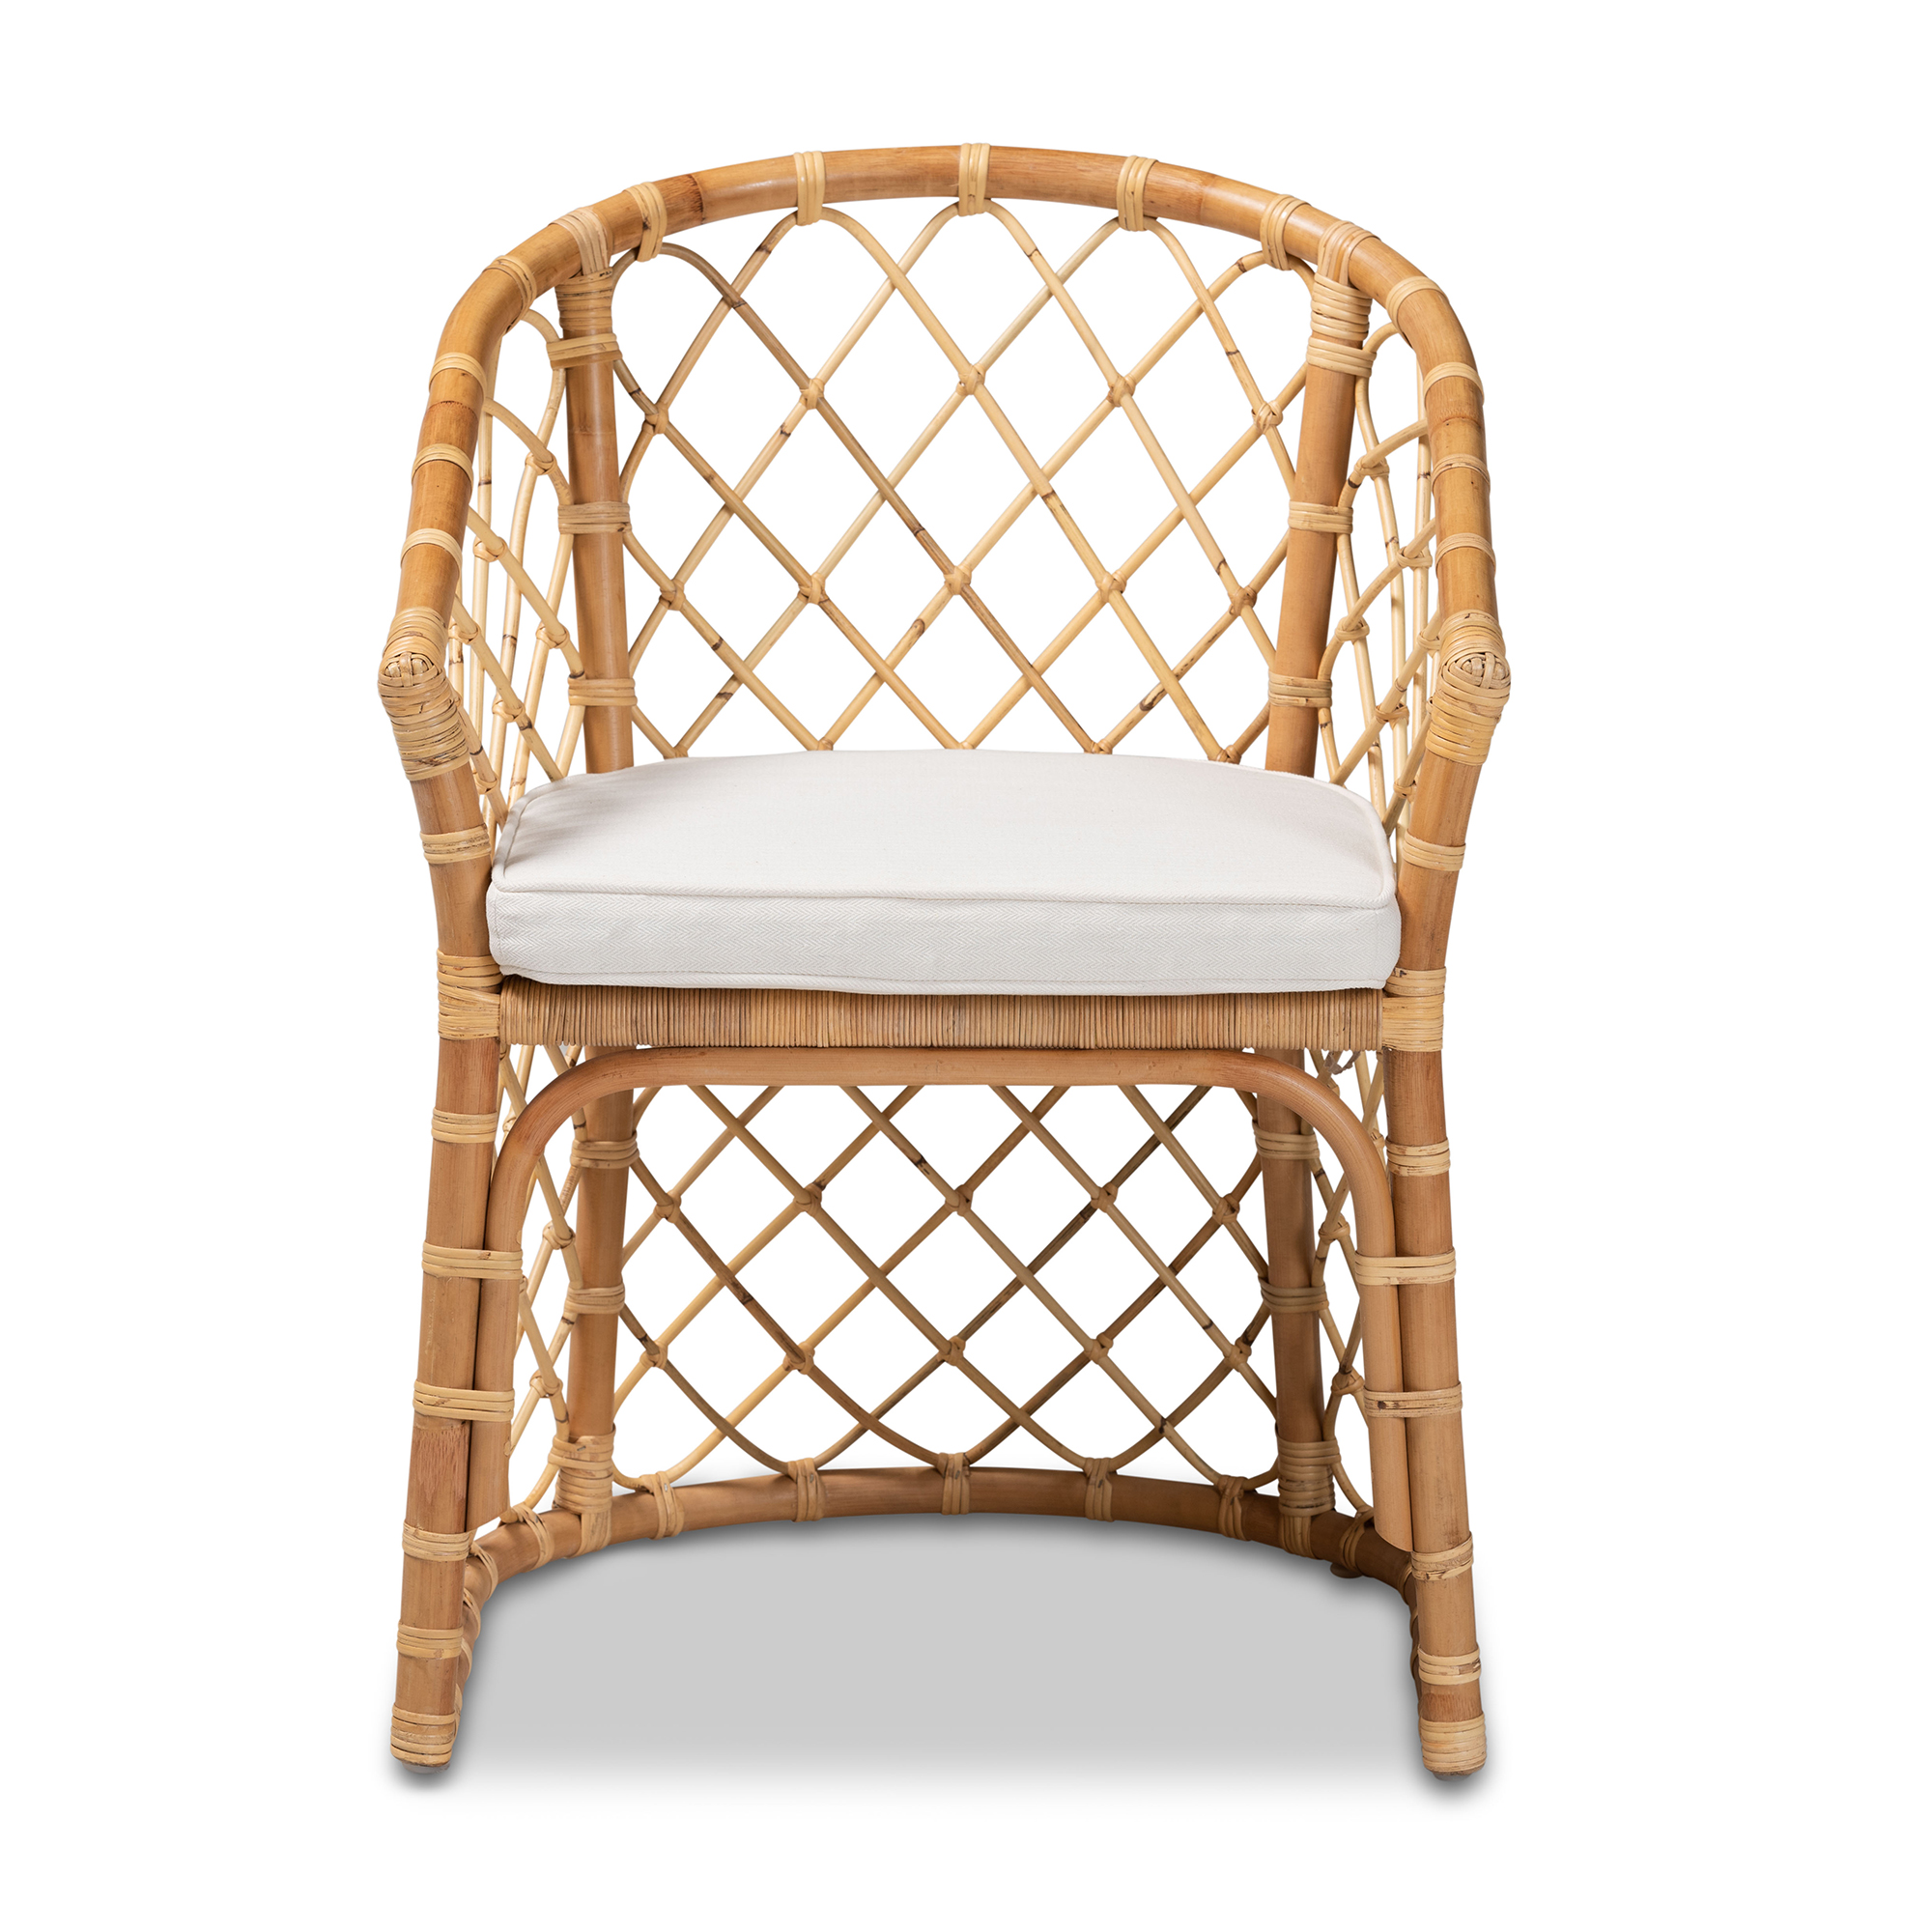 bali & pari Orchard Modern Bohemian White Fabric Upholstered and Natural Brown Rattan Dining Chair - image 3 of 10